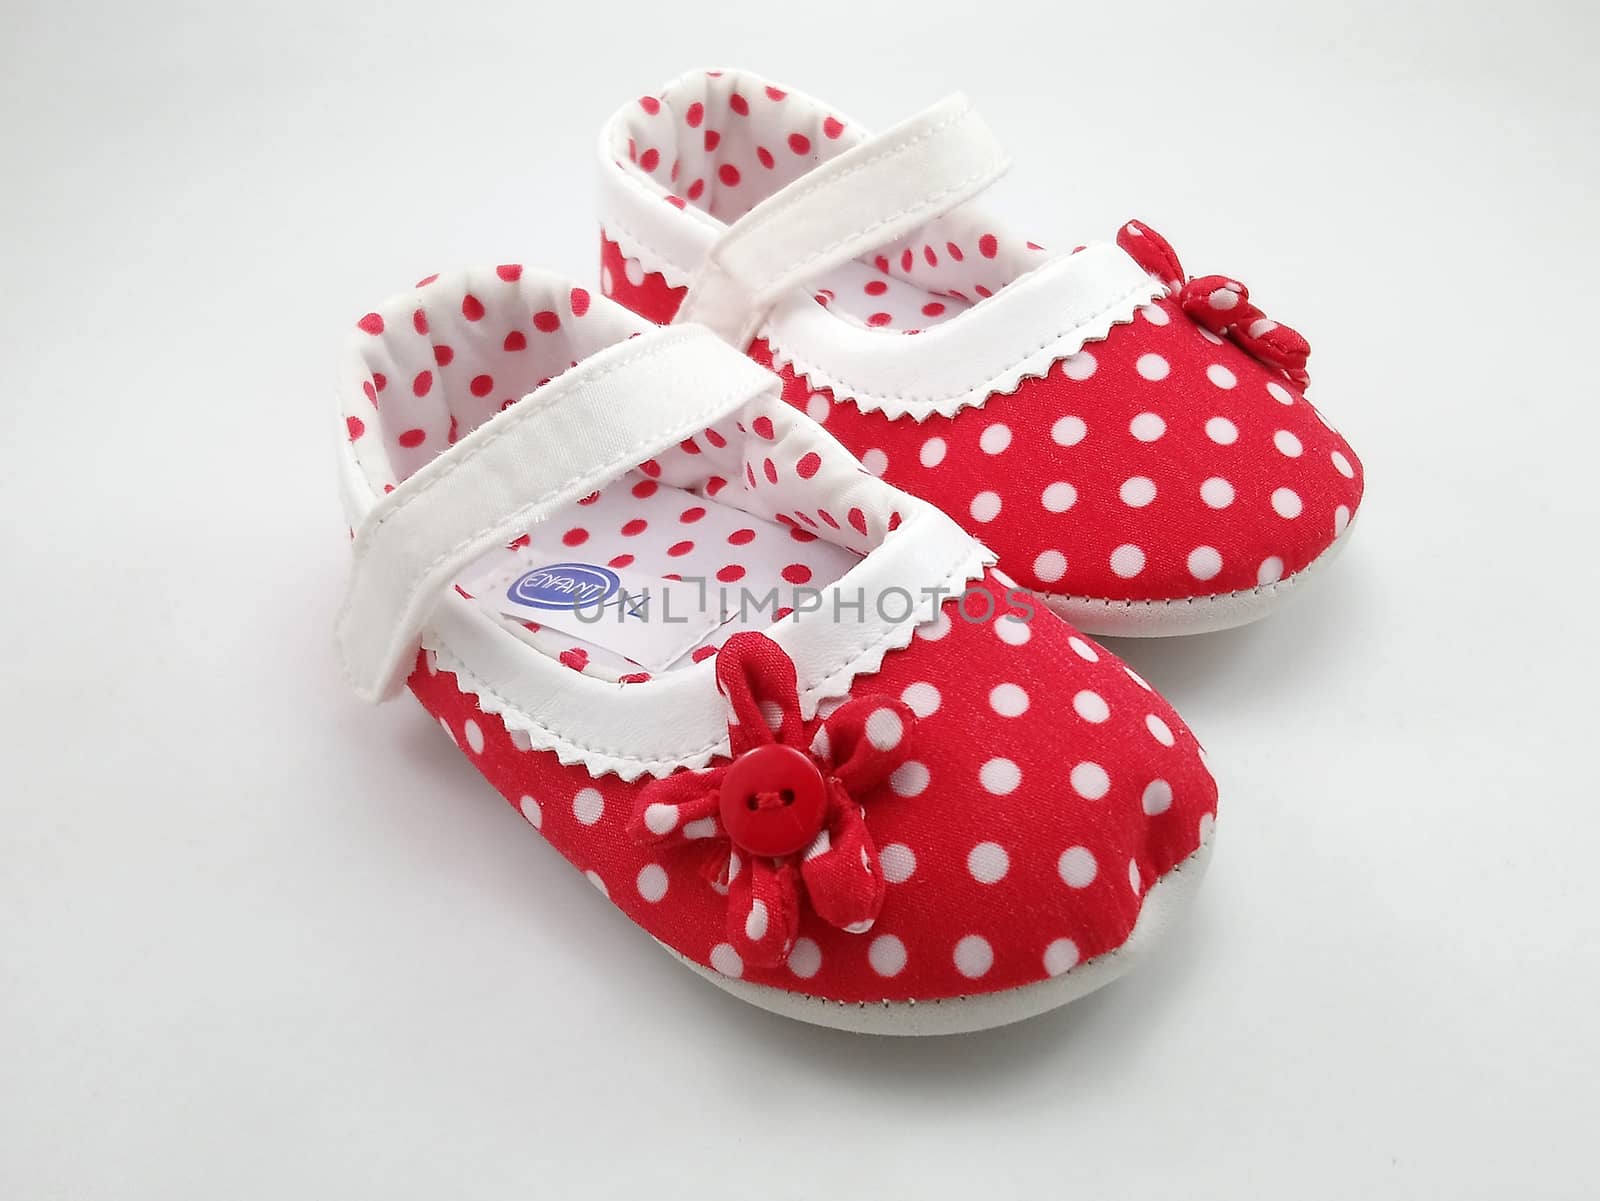 Enfant red polka dots baby shoes in Manila, Philippines by imwaltersy